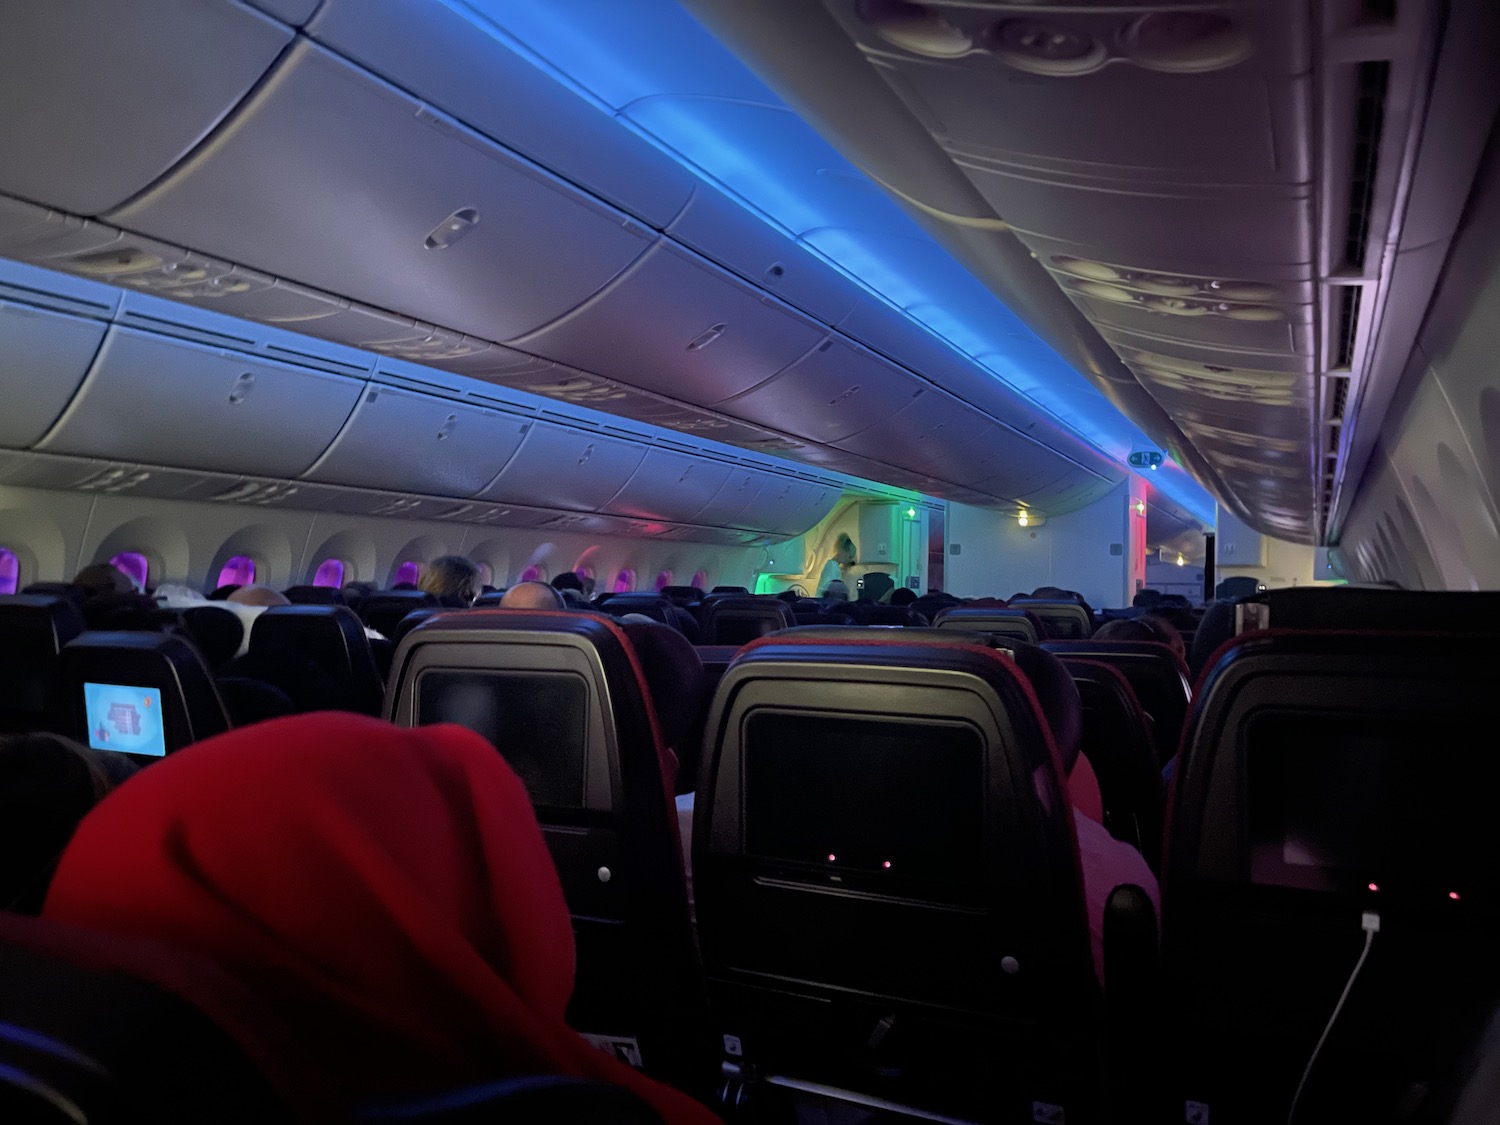 inside an airplane with seats and lights